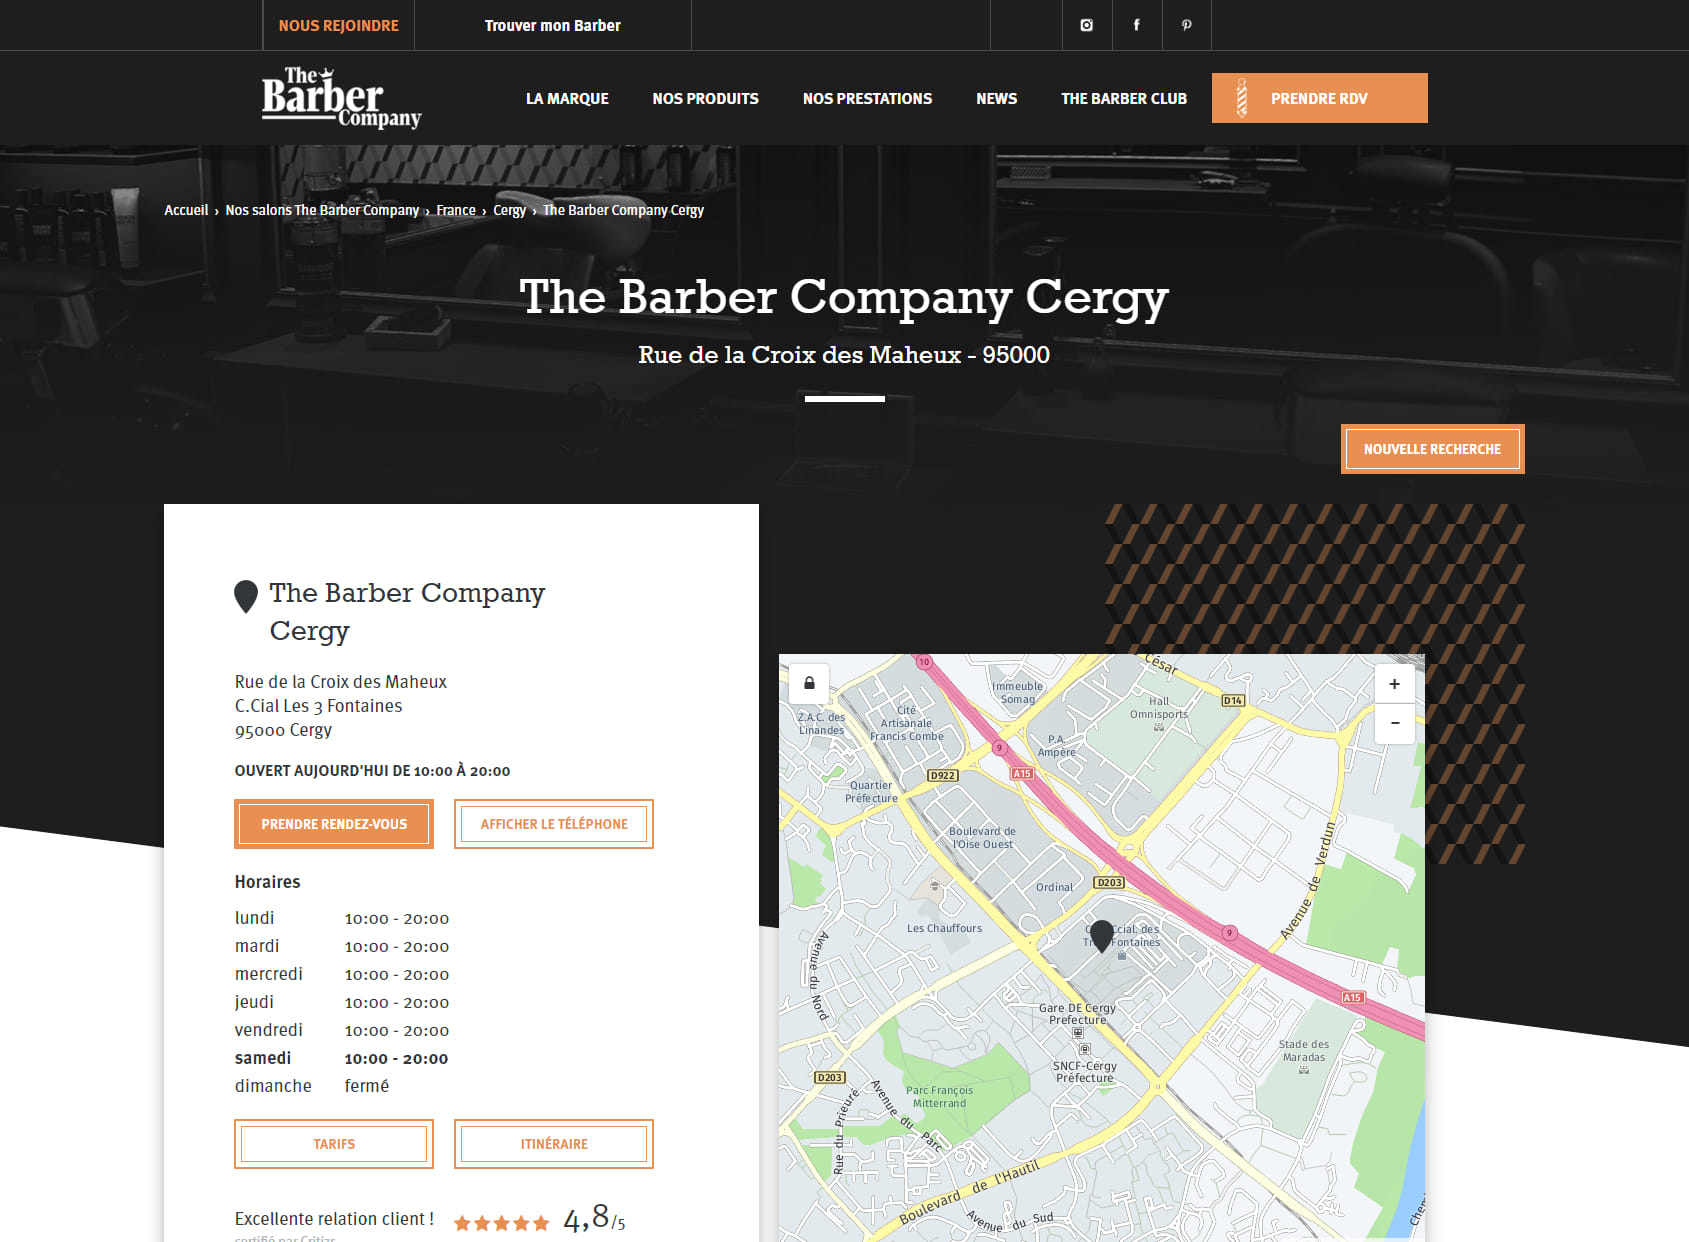 The Barber Company - Coiffeur Barbier Cergy